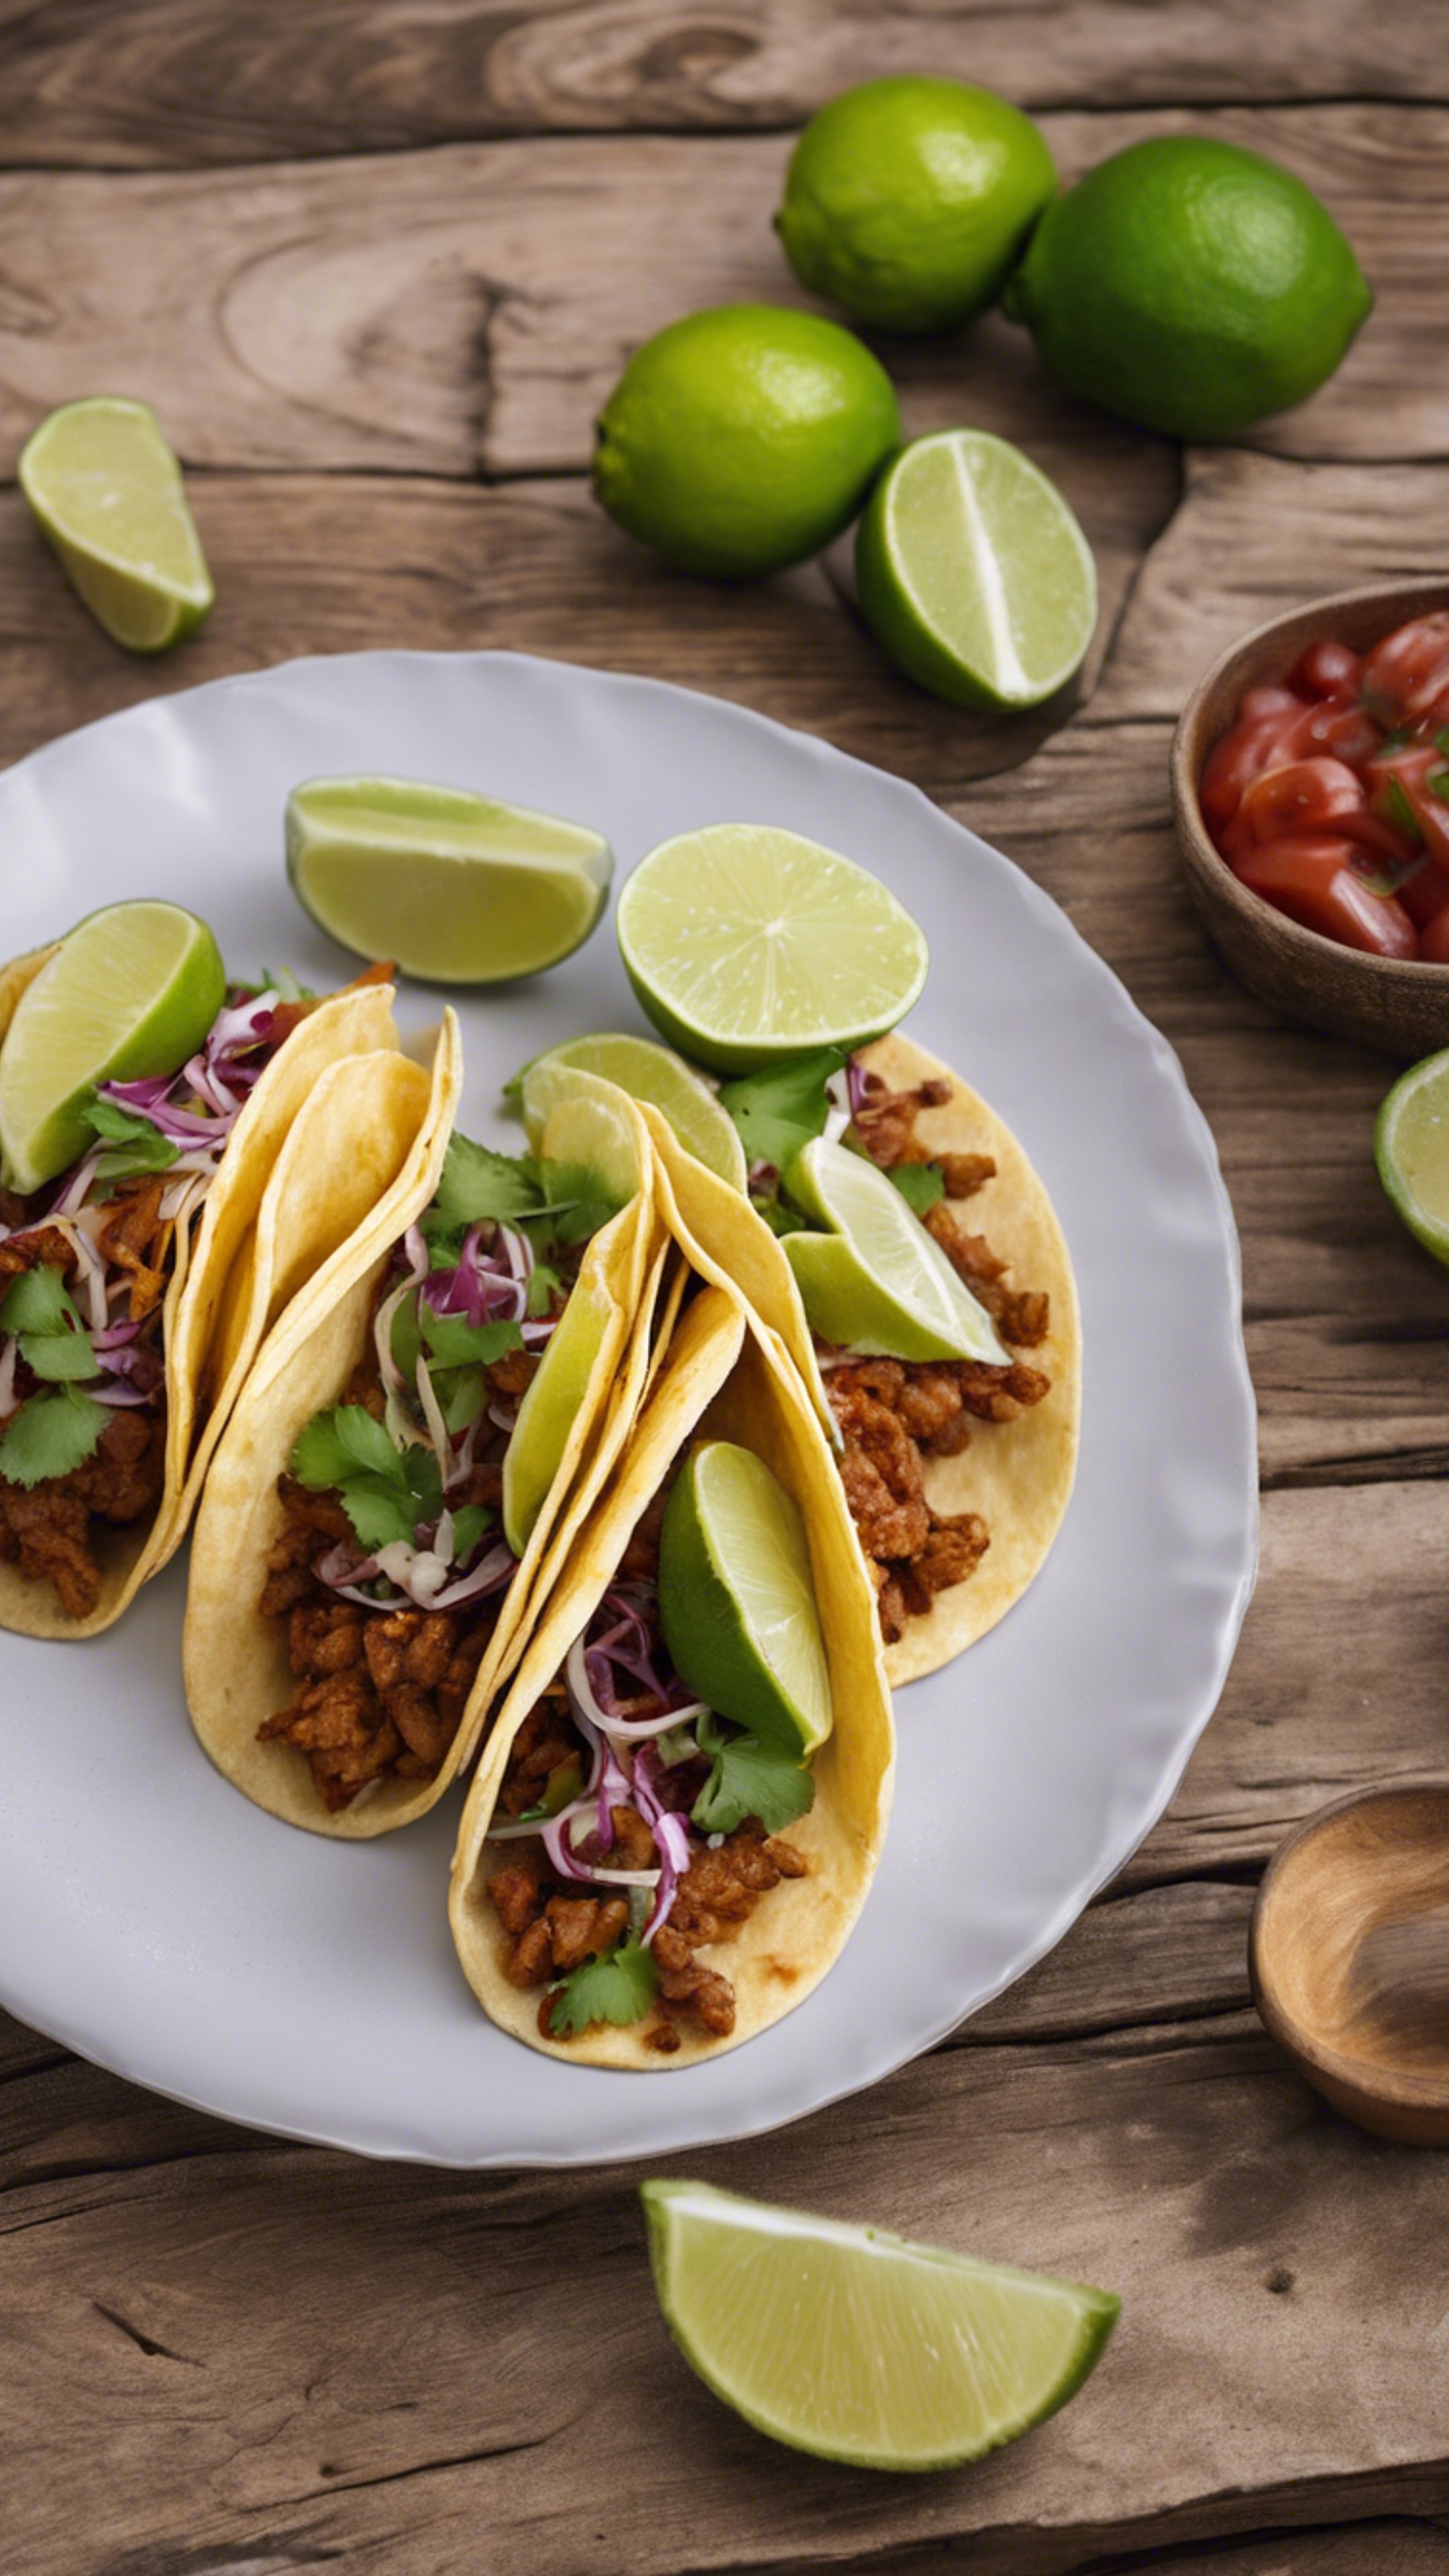 A plate of tacos garnished with fresh lime wedges on a rustic wooden table. کاغذ دیواری[5f6c6b777f9c4d0caf3c]